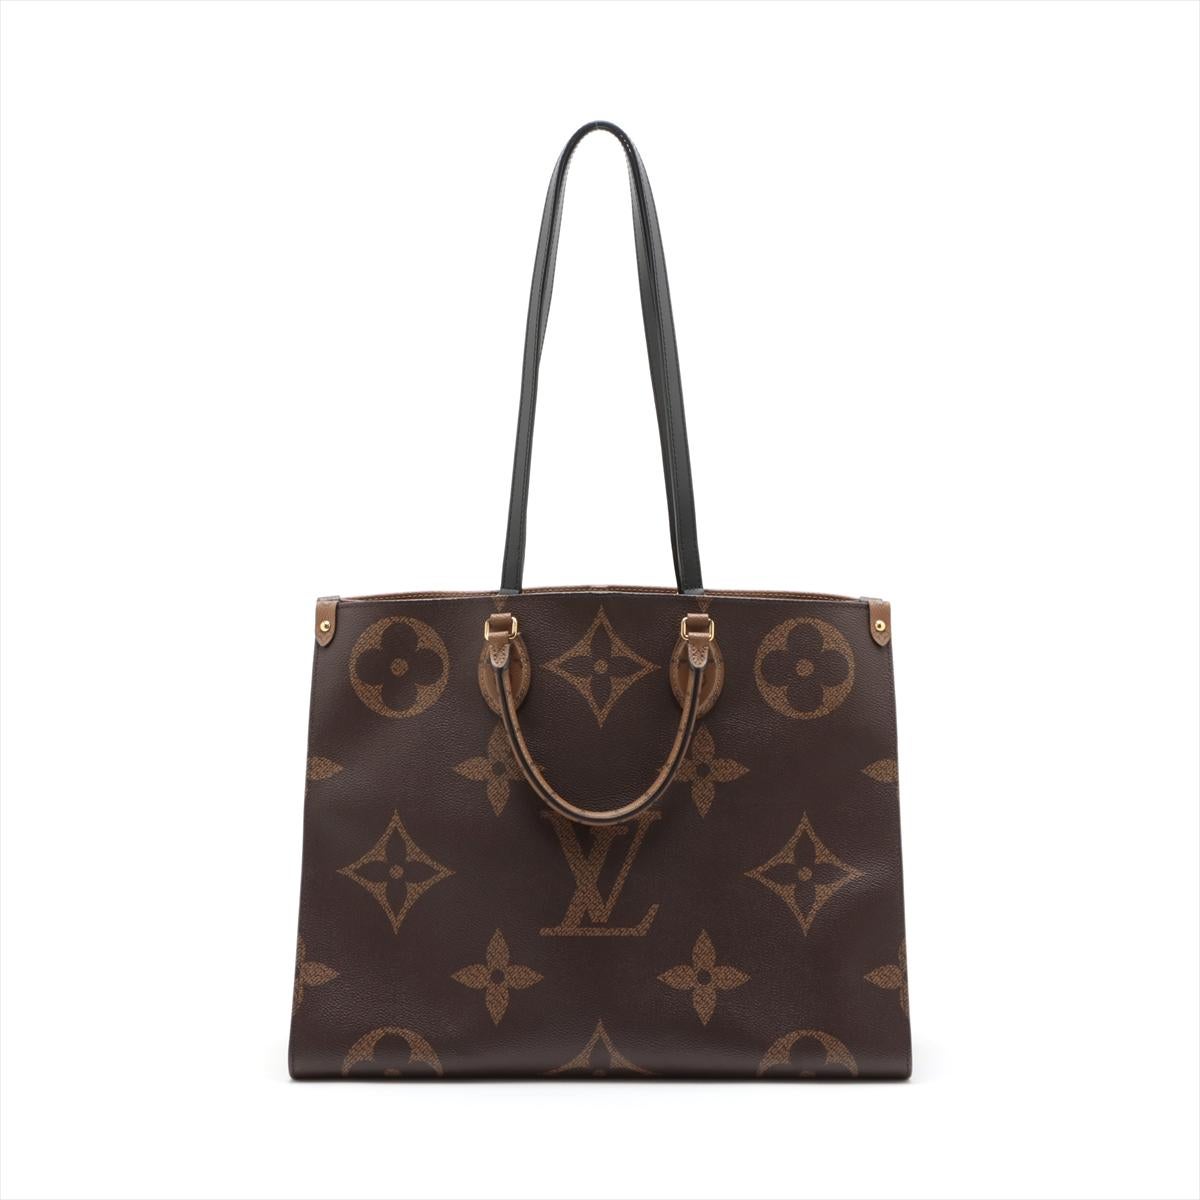 The Louis Vuitton Monogram Giant Reverse On the Go GM effortlessly captures attention with its bold and contemporary design. Featuring the iconic Monogram pattern in a striking, oversized reverse motif, the tote is a statement of modern luxury. The